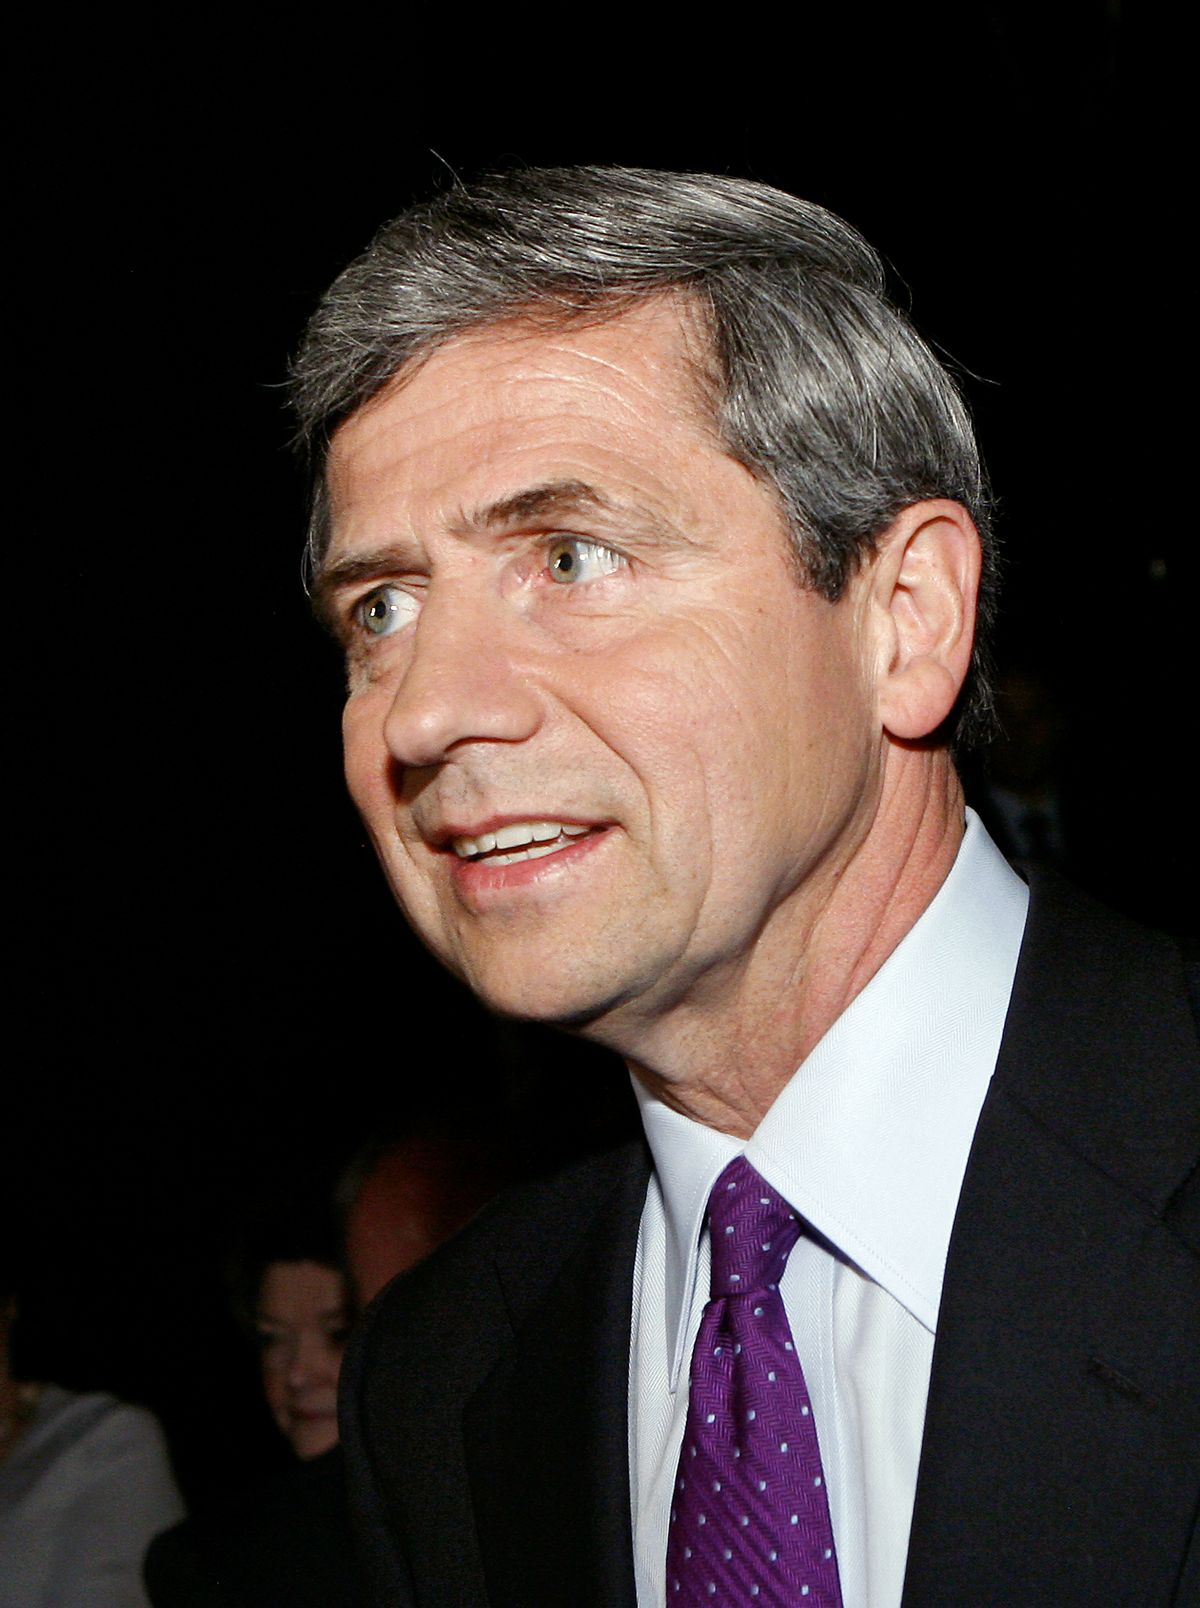 Dem. congressman Joe Sestak arrives for a debate with Dem. Sen. Arlen Specter at Fox Philadelphia studios Saturday, May 1, 2010. Pennsylvania's two Democratic candidates for U.S. Senate dueled over character issues and their devotion to Democratic principles in the live debate. (AP Photo/Mark Stehle) (Mark Stehle)